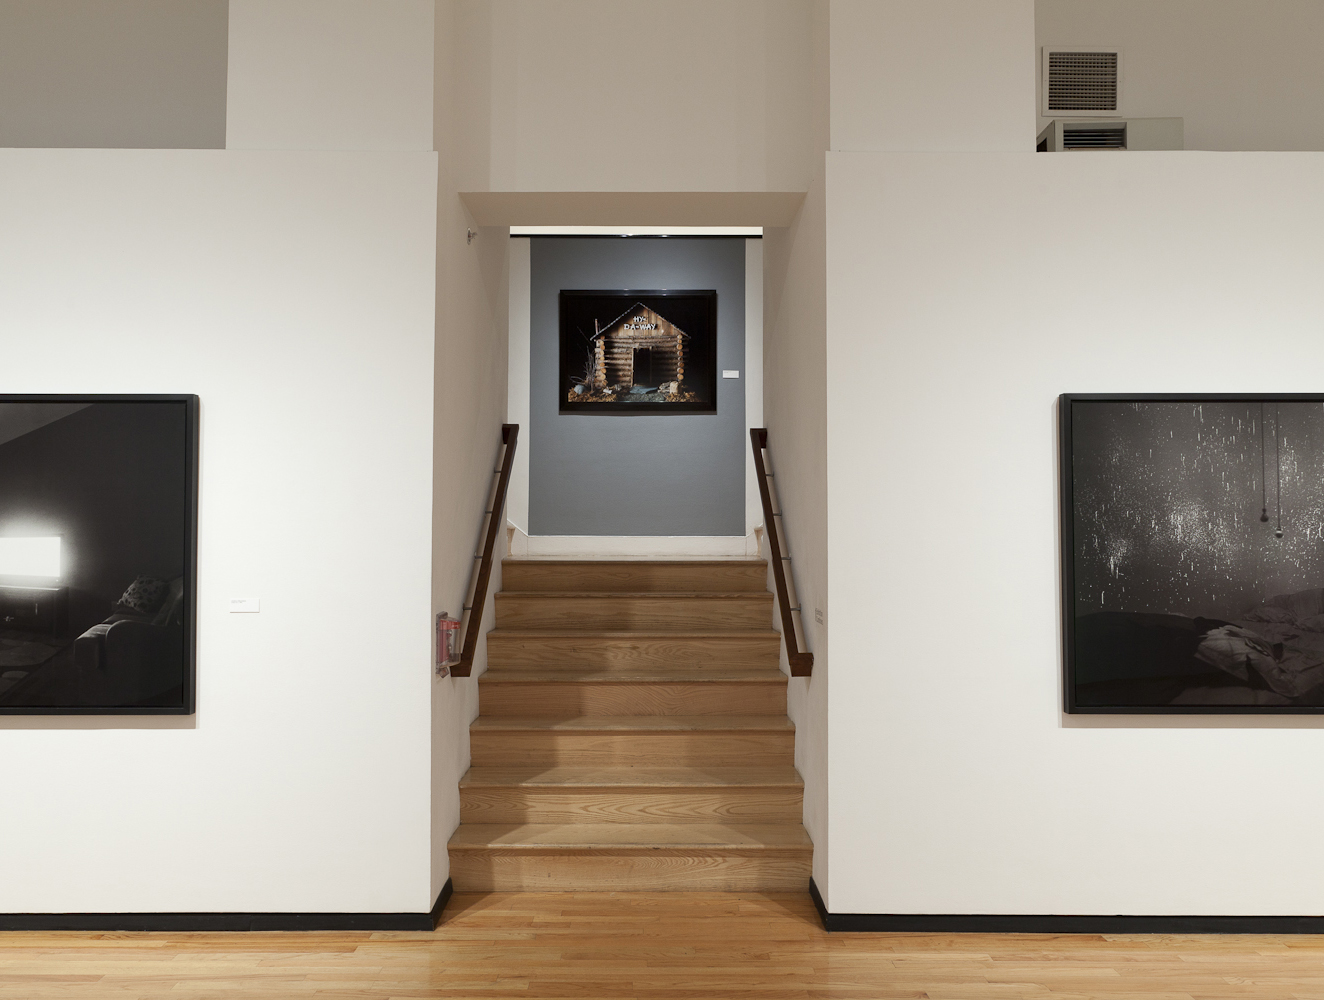    Installation view: Museum of Contemporary Photography, Chicago   